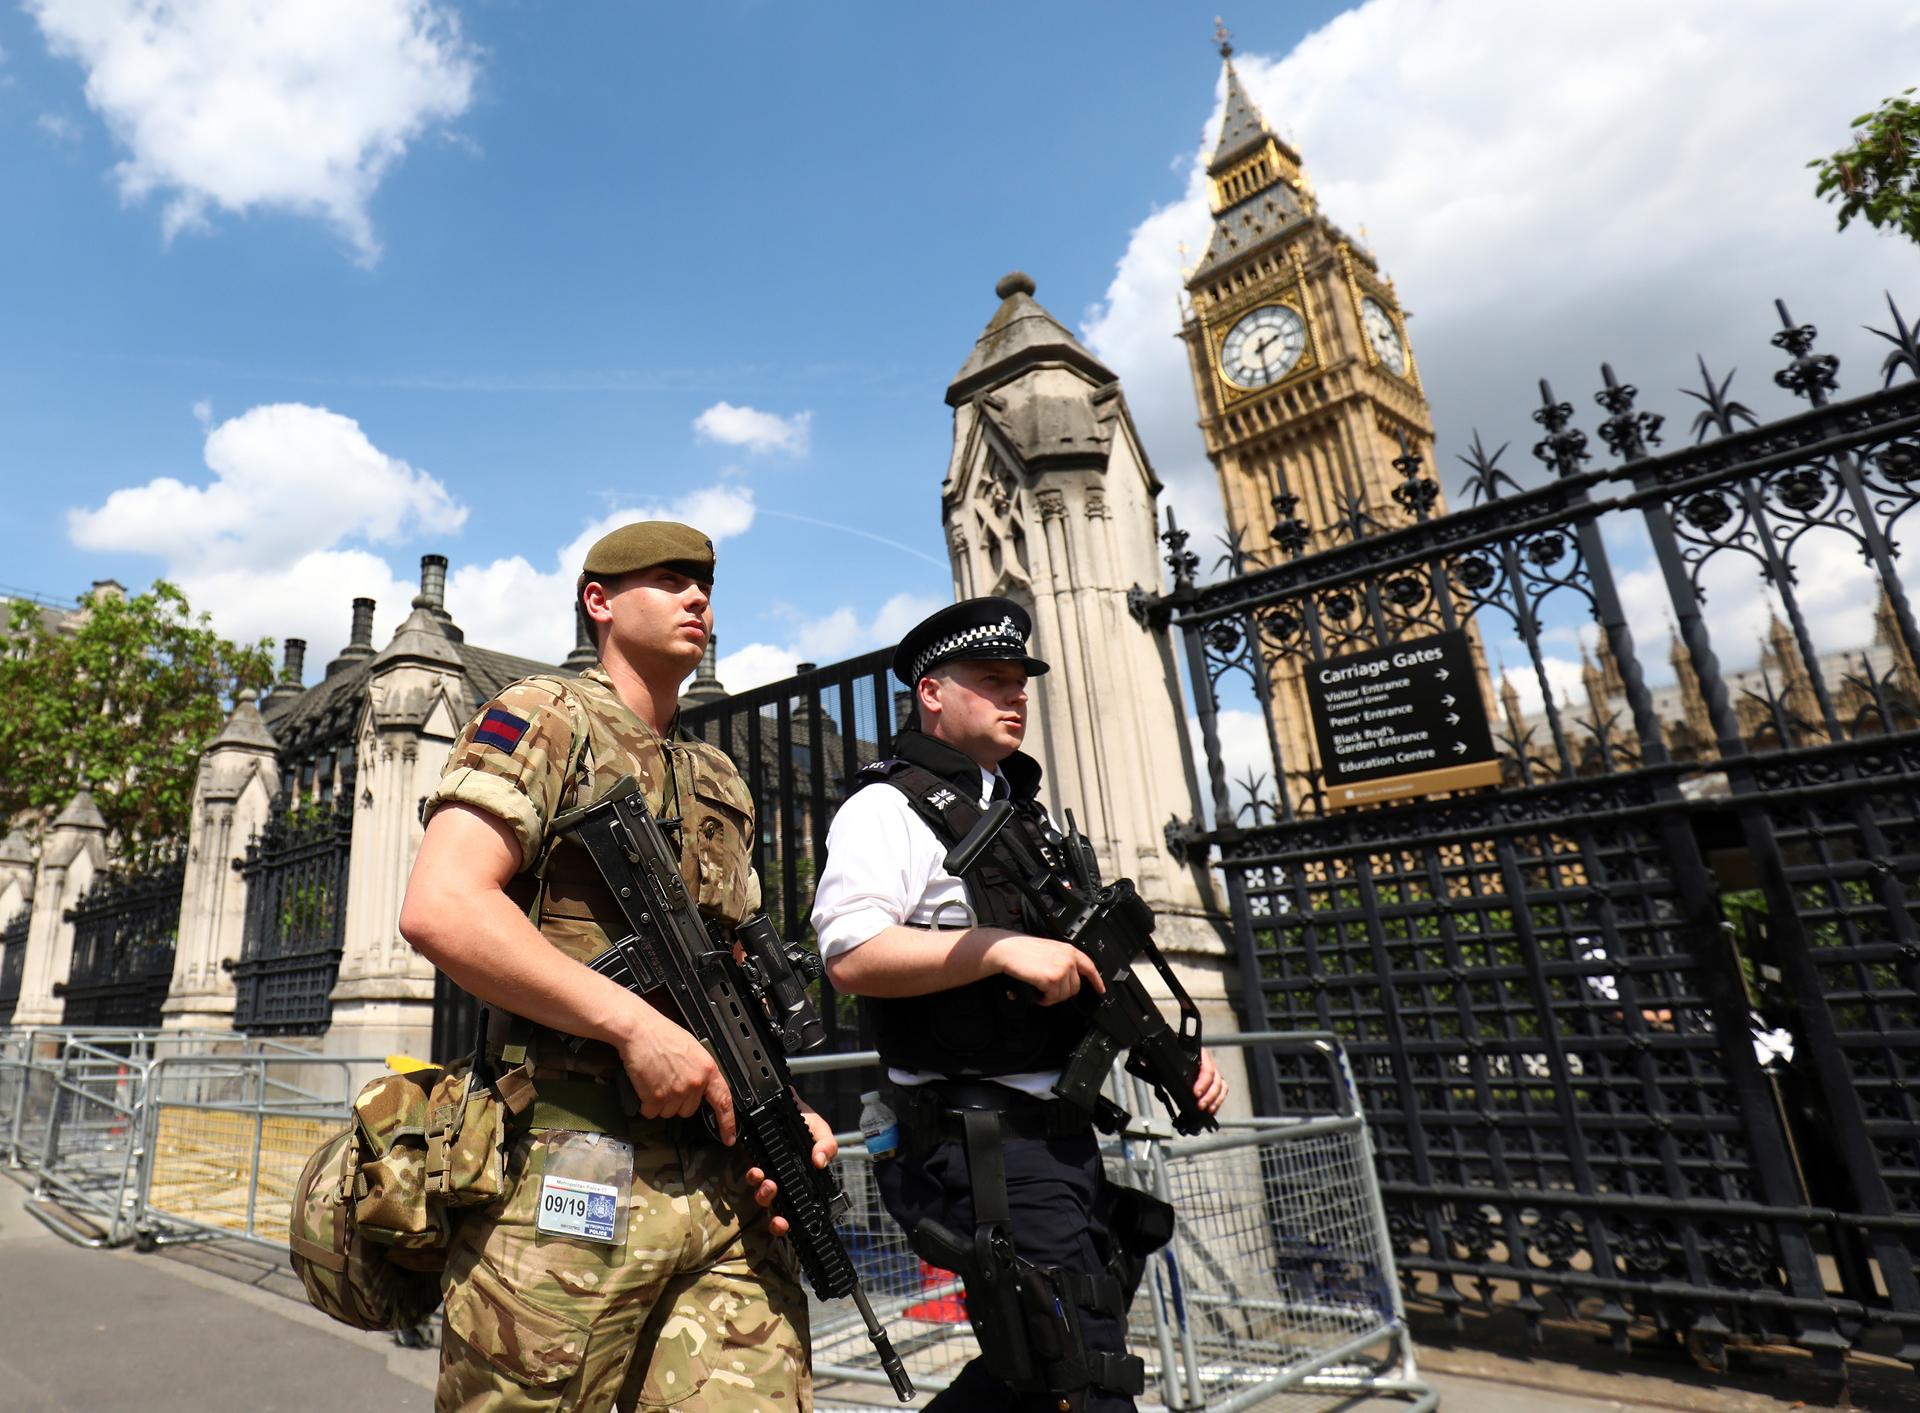 Troops have been deployed to guard key sites in London and other British cities.